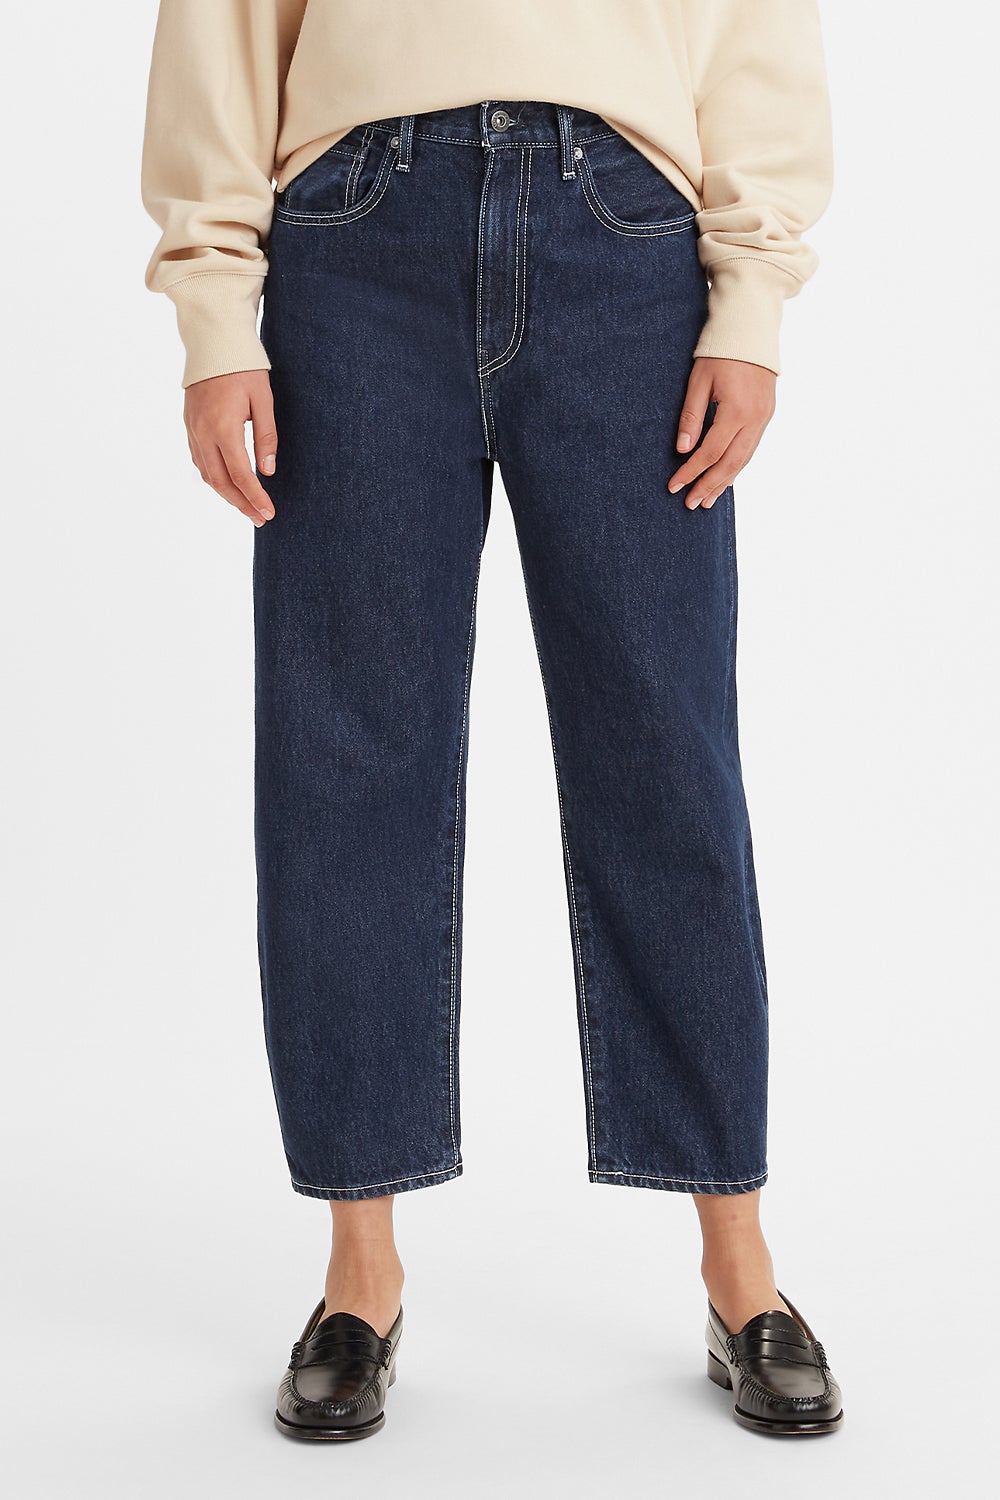 Levi's Made and Crafted Barrel Jeans Spring Rinse